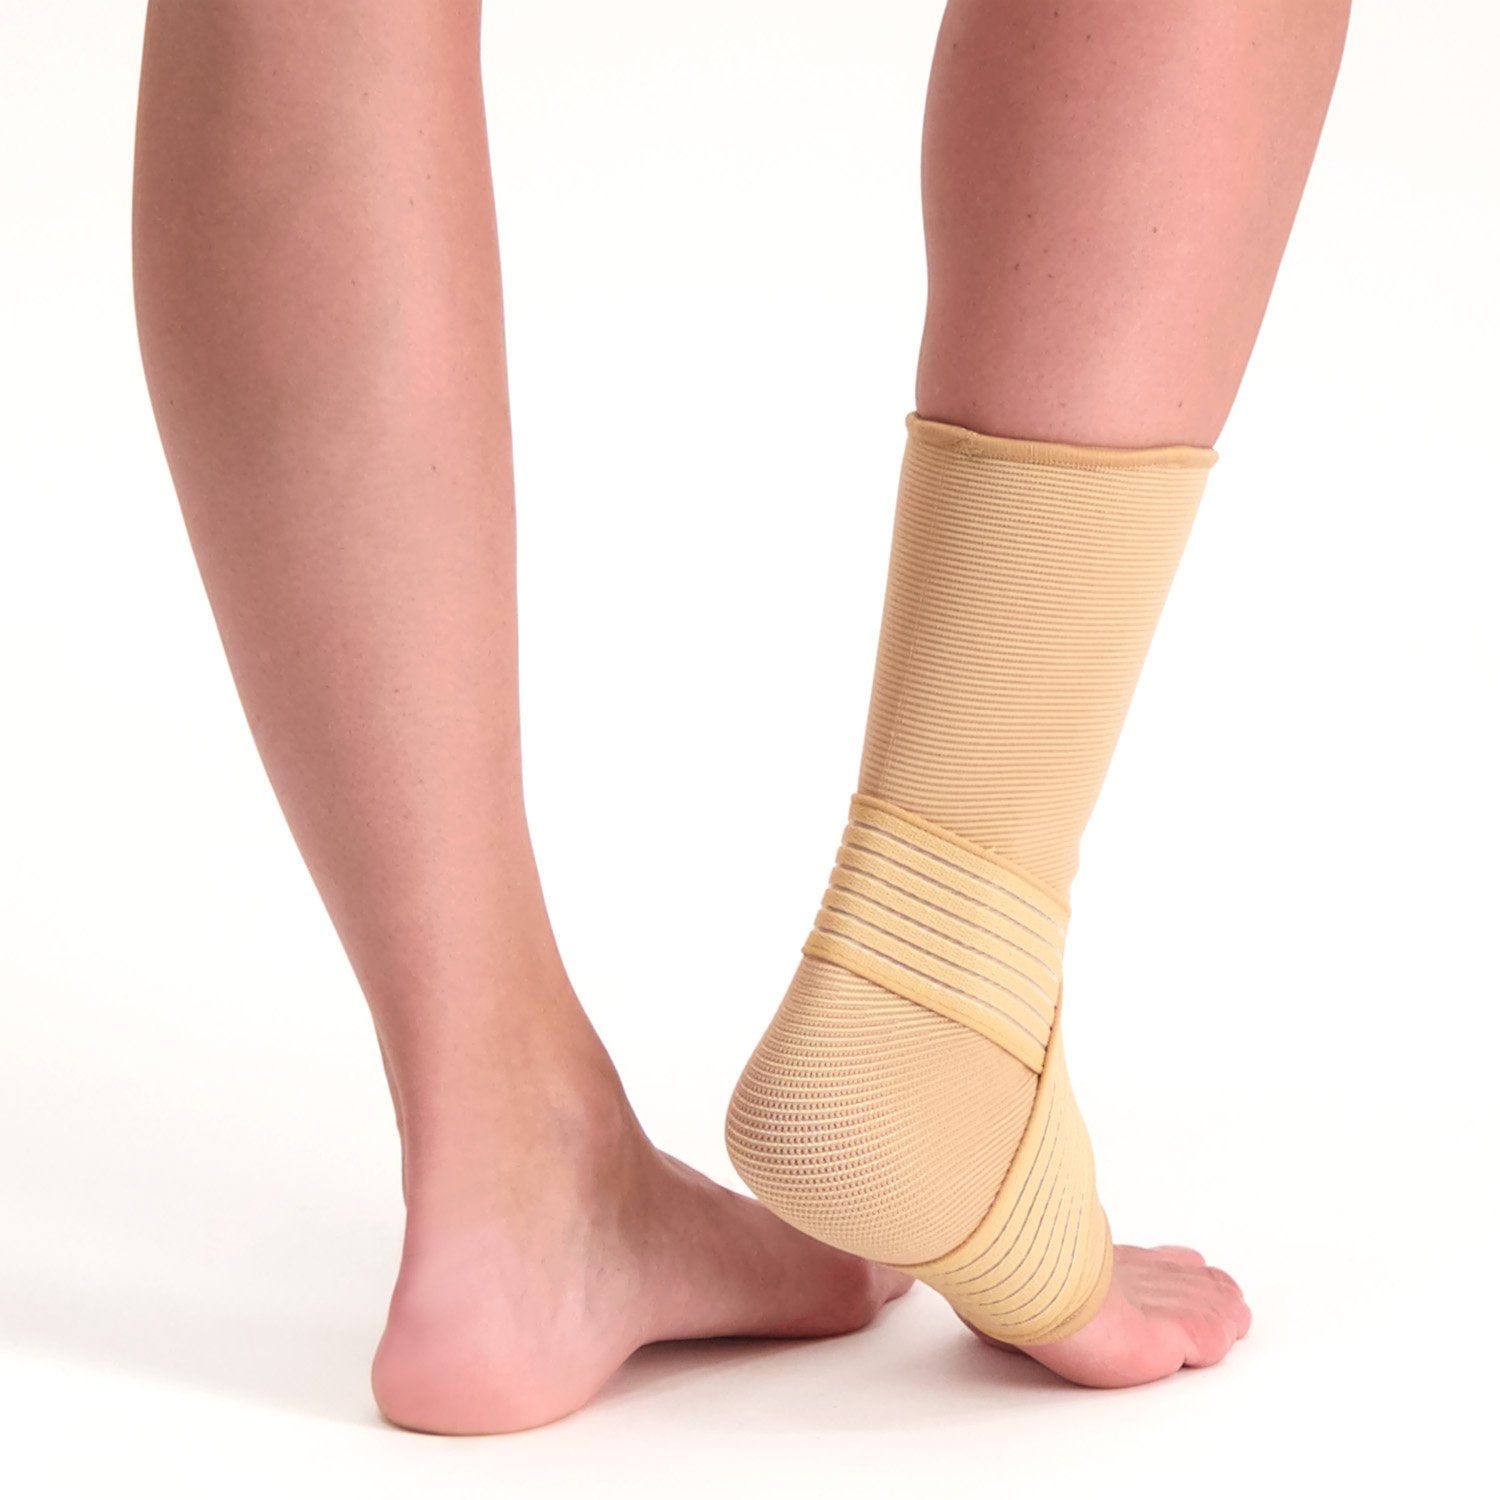 dunimed premium ankle support on right foot